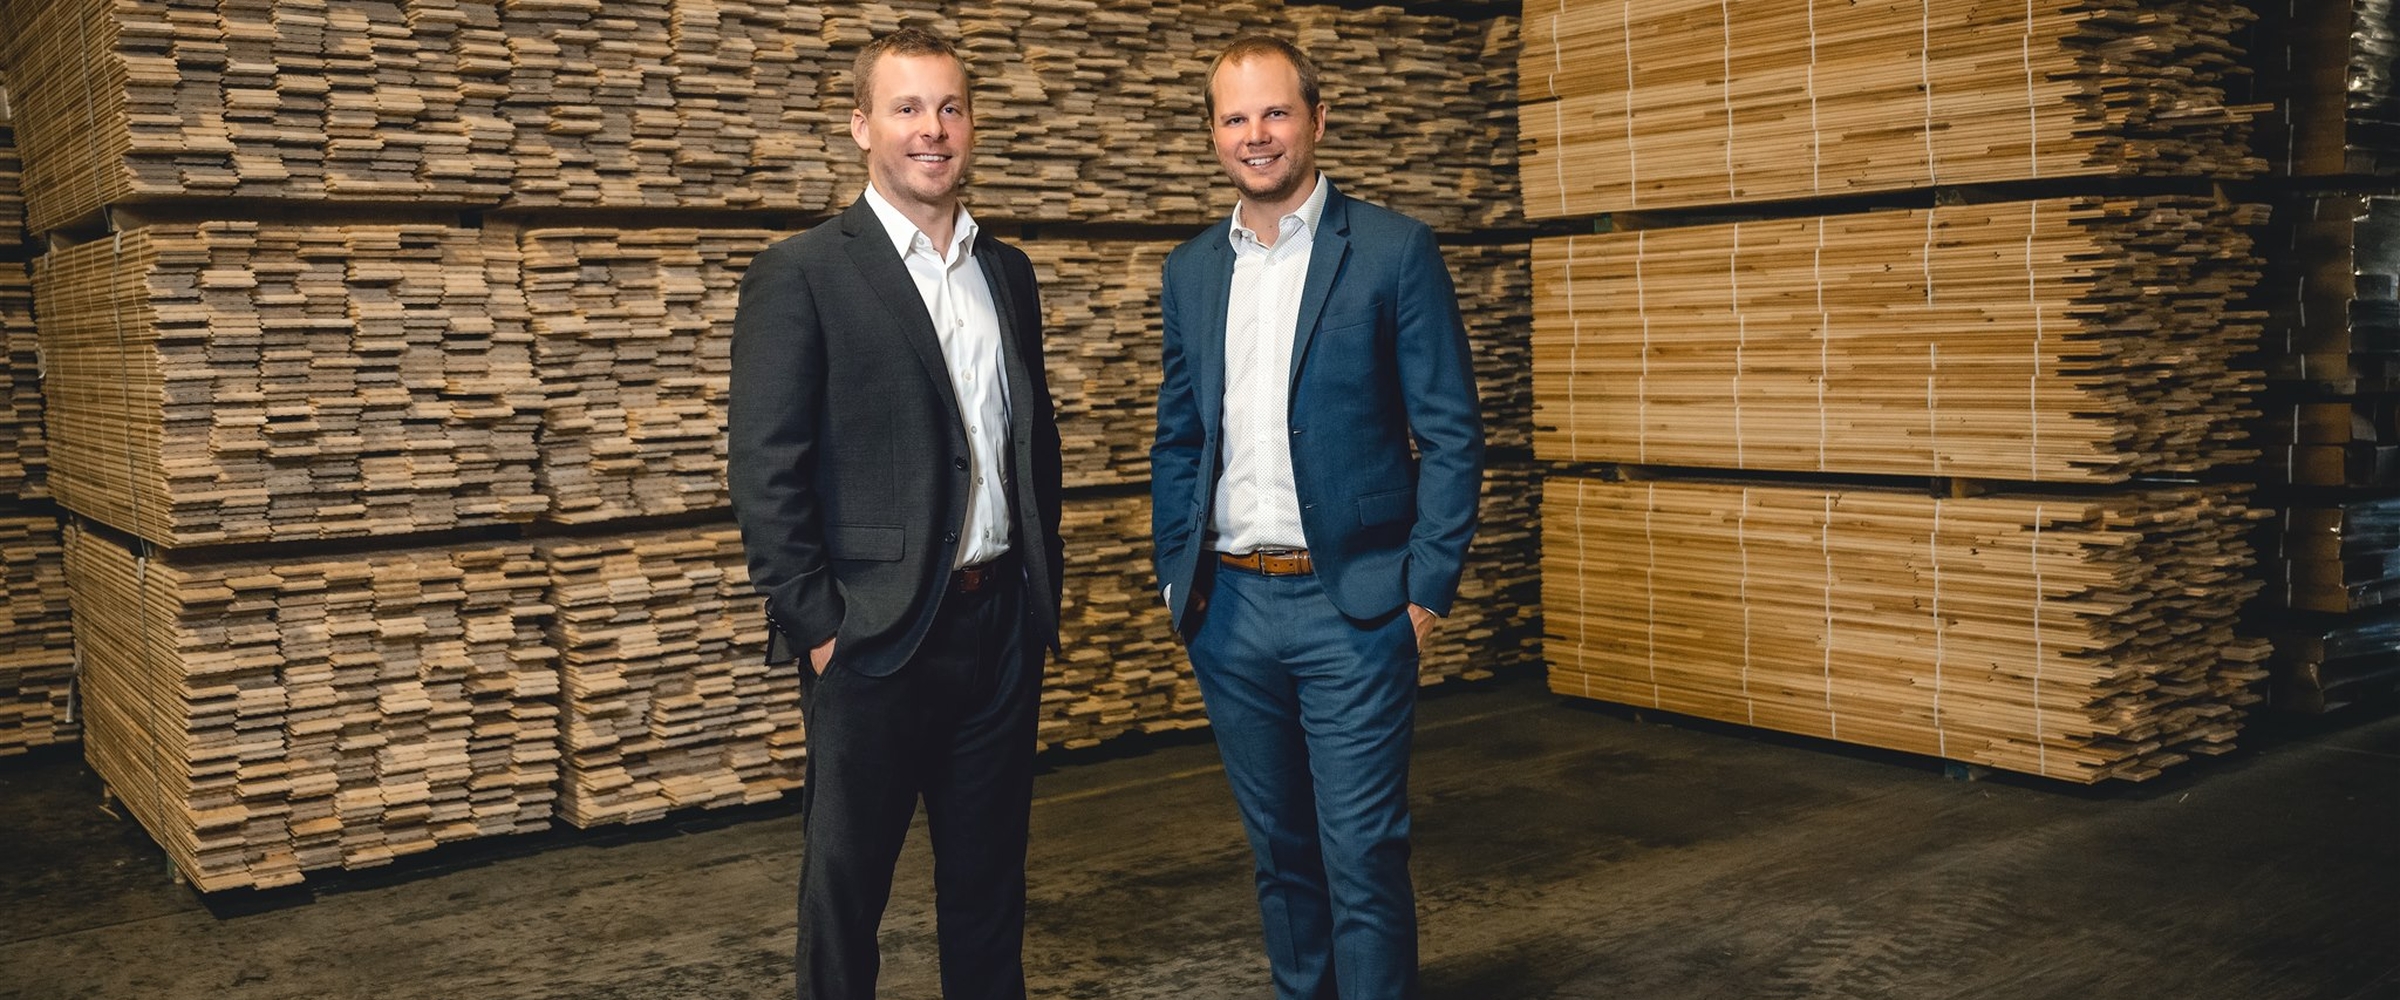 Mercier Wood Flooring passes the torch to the third generation